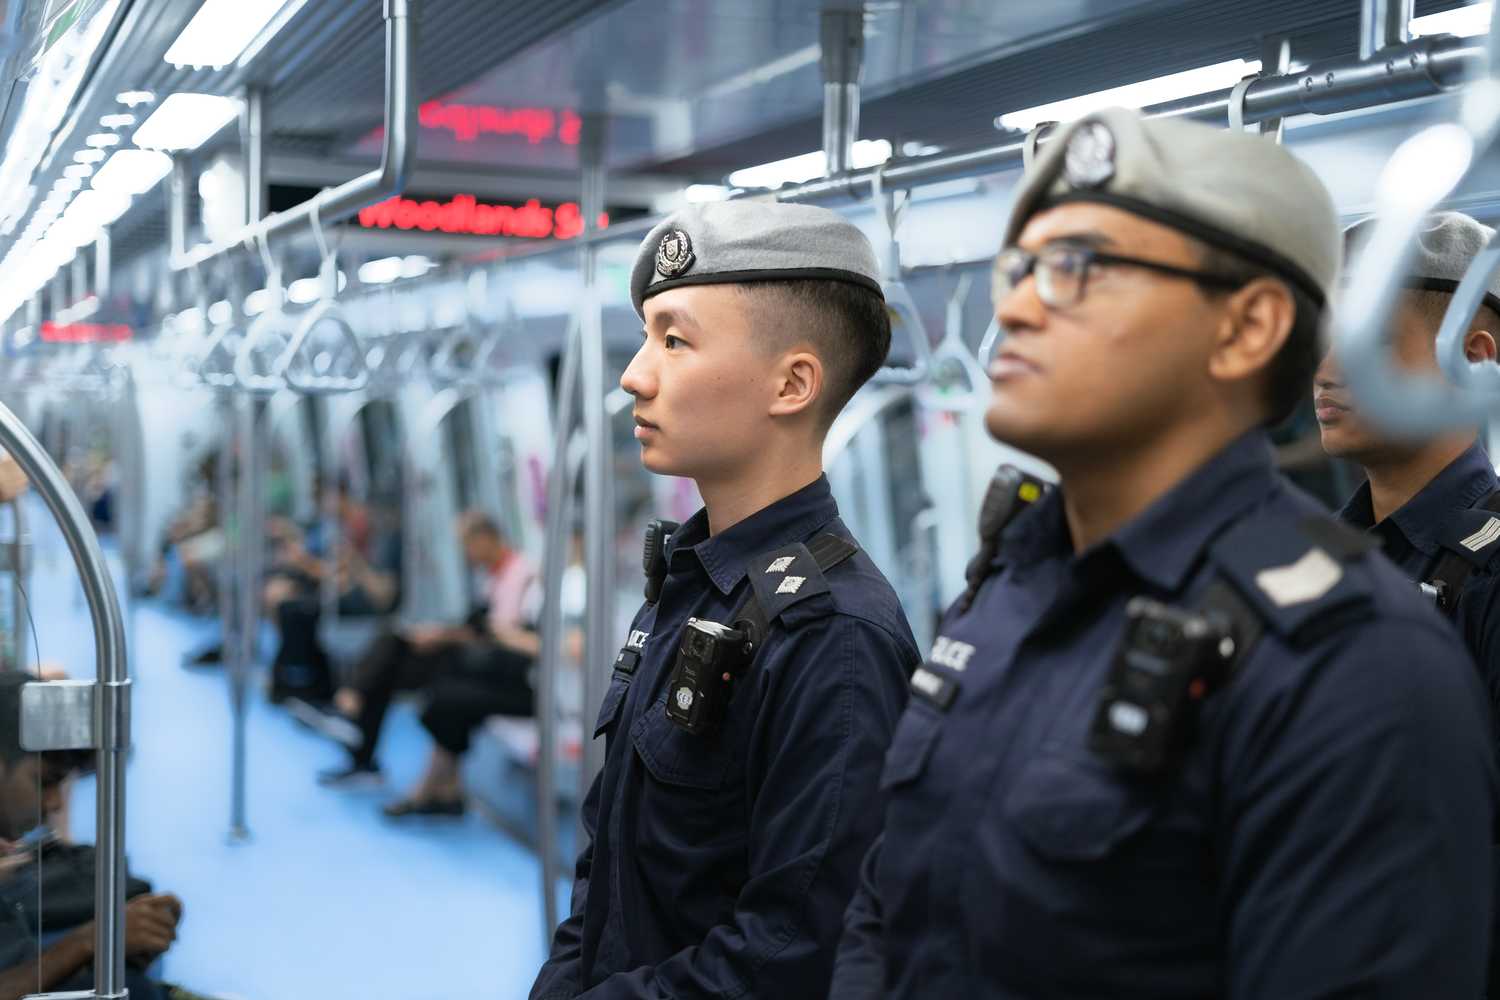 officers standing focused and facing the left, inside a moving train